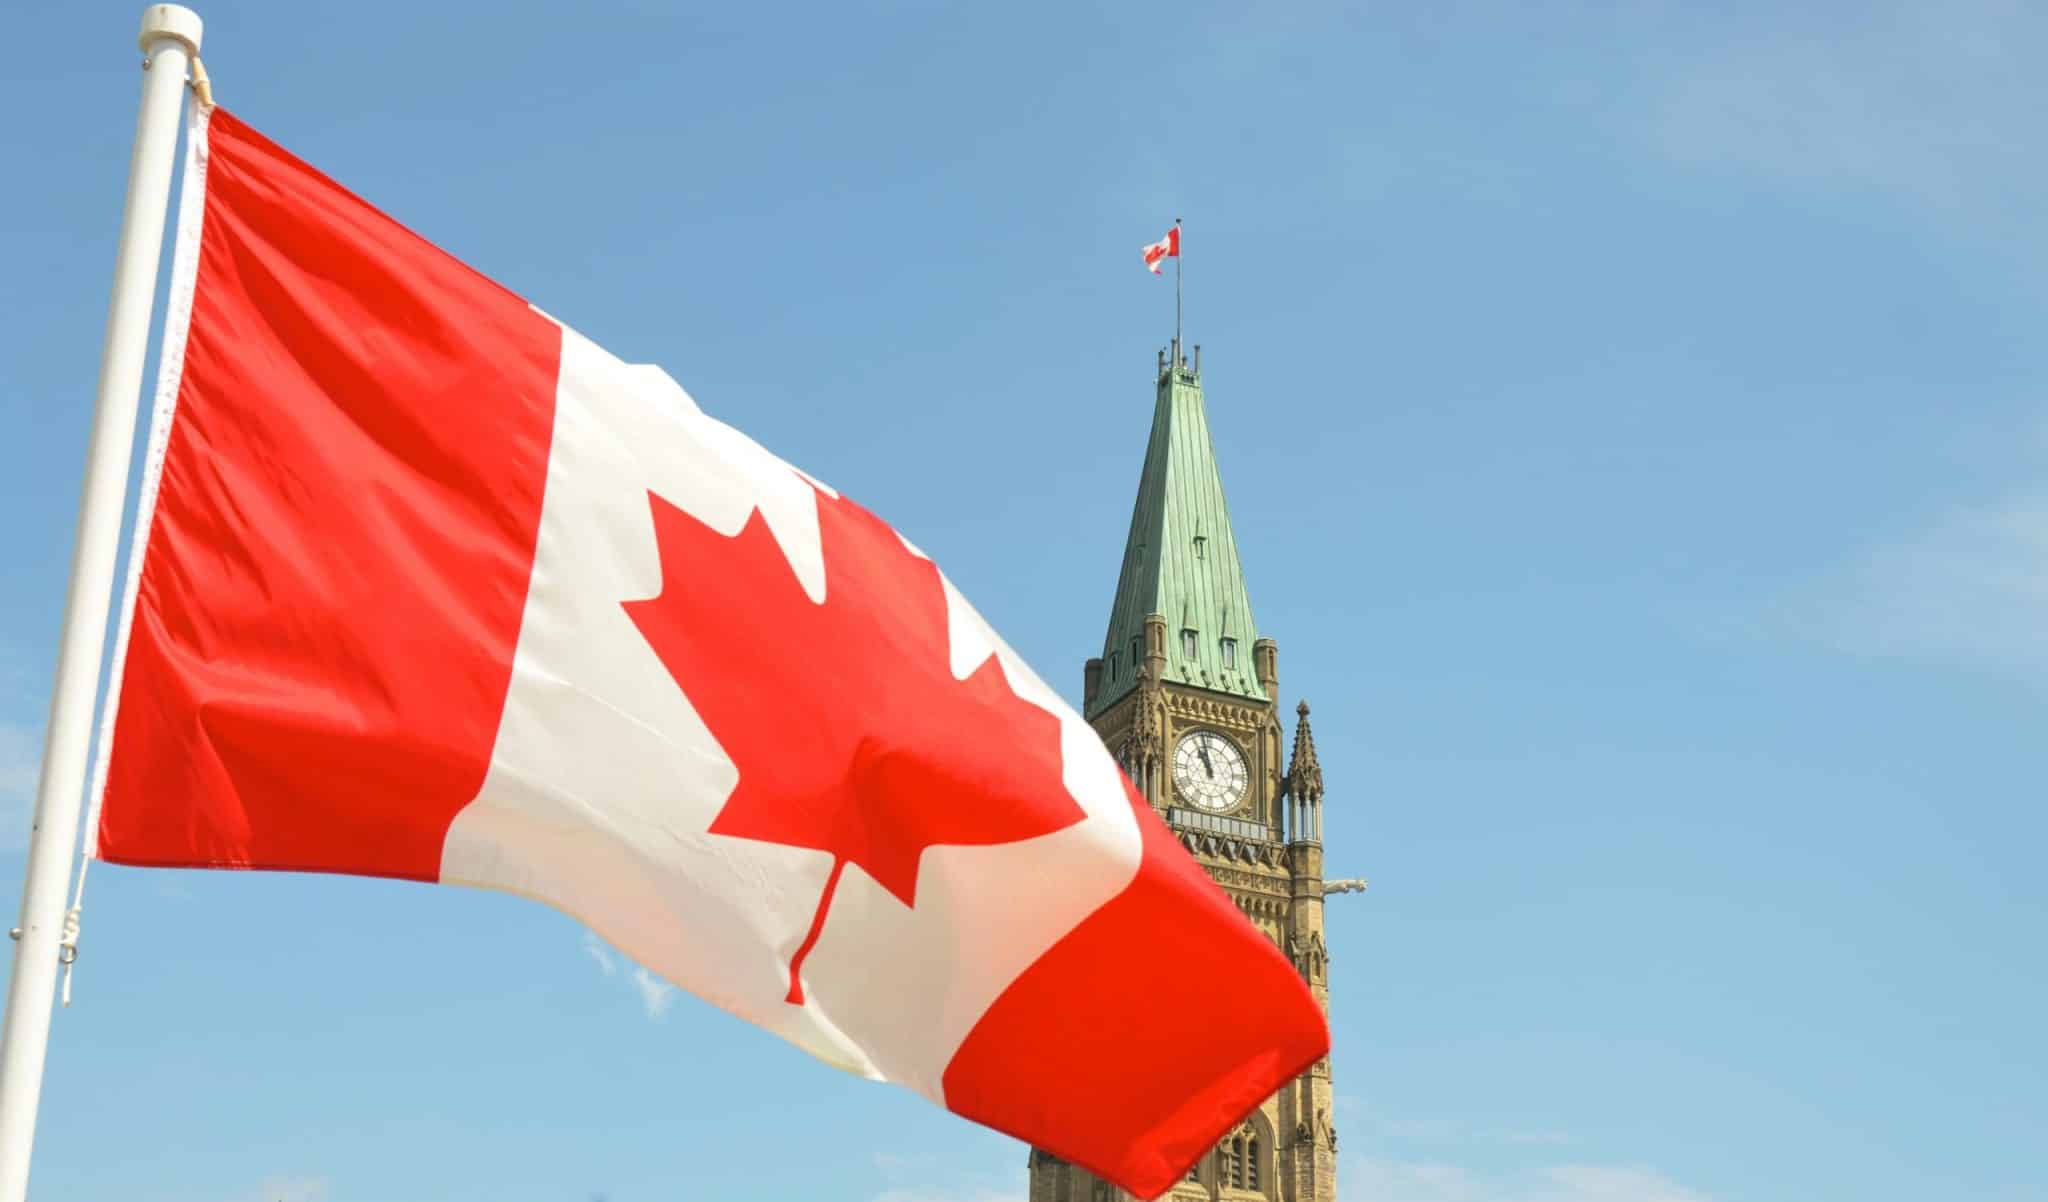 Canada BTC: In the latest Canada crypto tax crackdown, in effort to secure more than $40M CAD in uncollected taxation from retail investors.